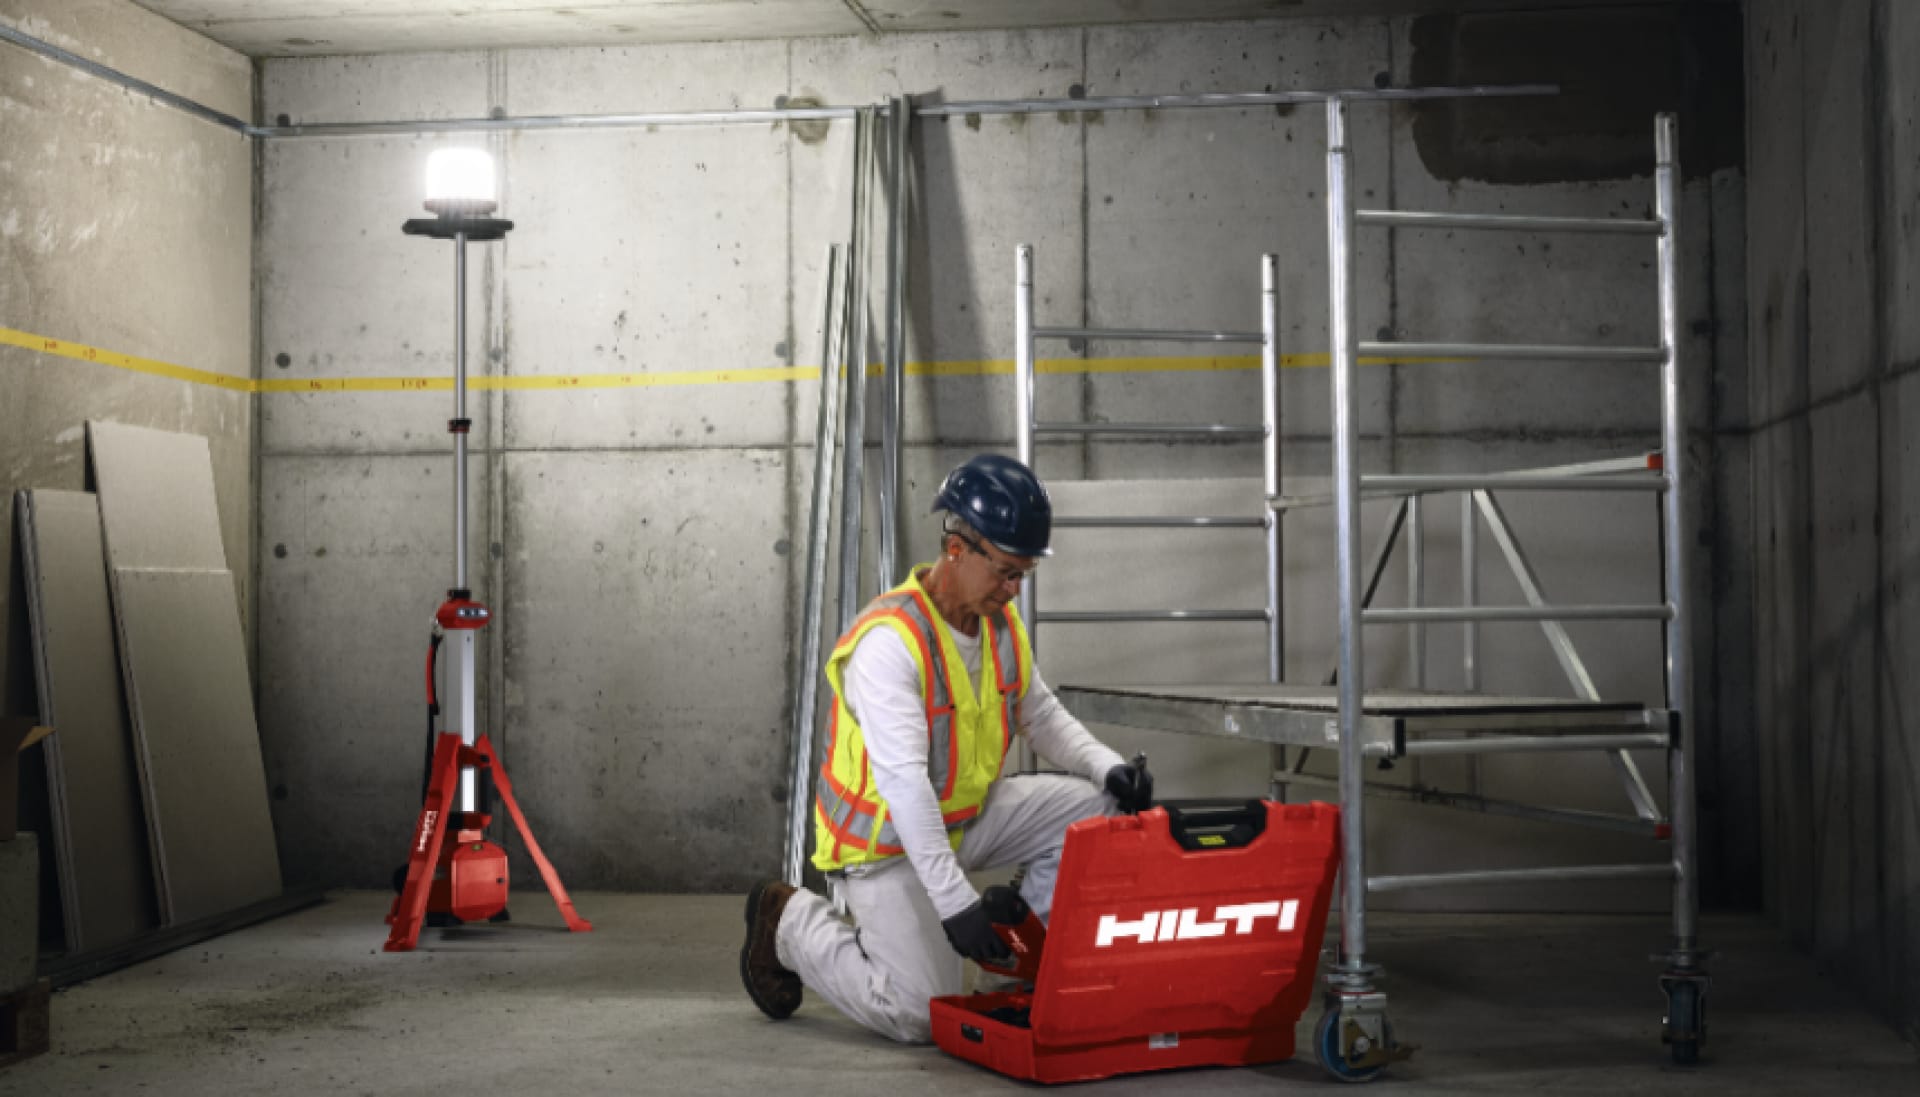 Worked taking our tool from Hilti box while the area is lit by Hilti SL 10-22 tower light